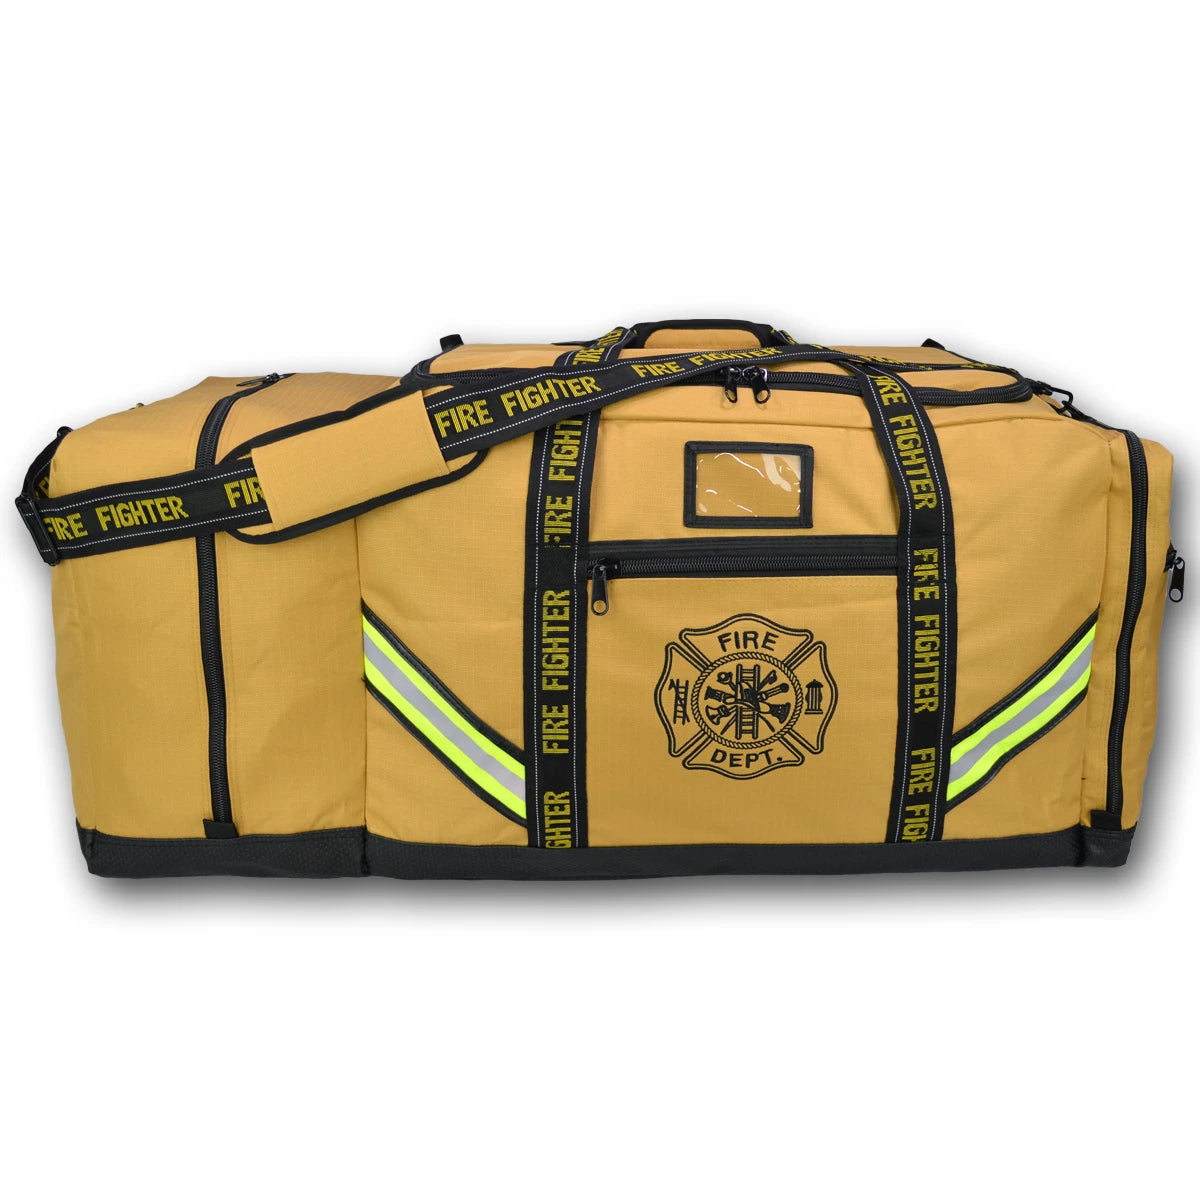 Extra Large Firefighter Turnout Bag